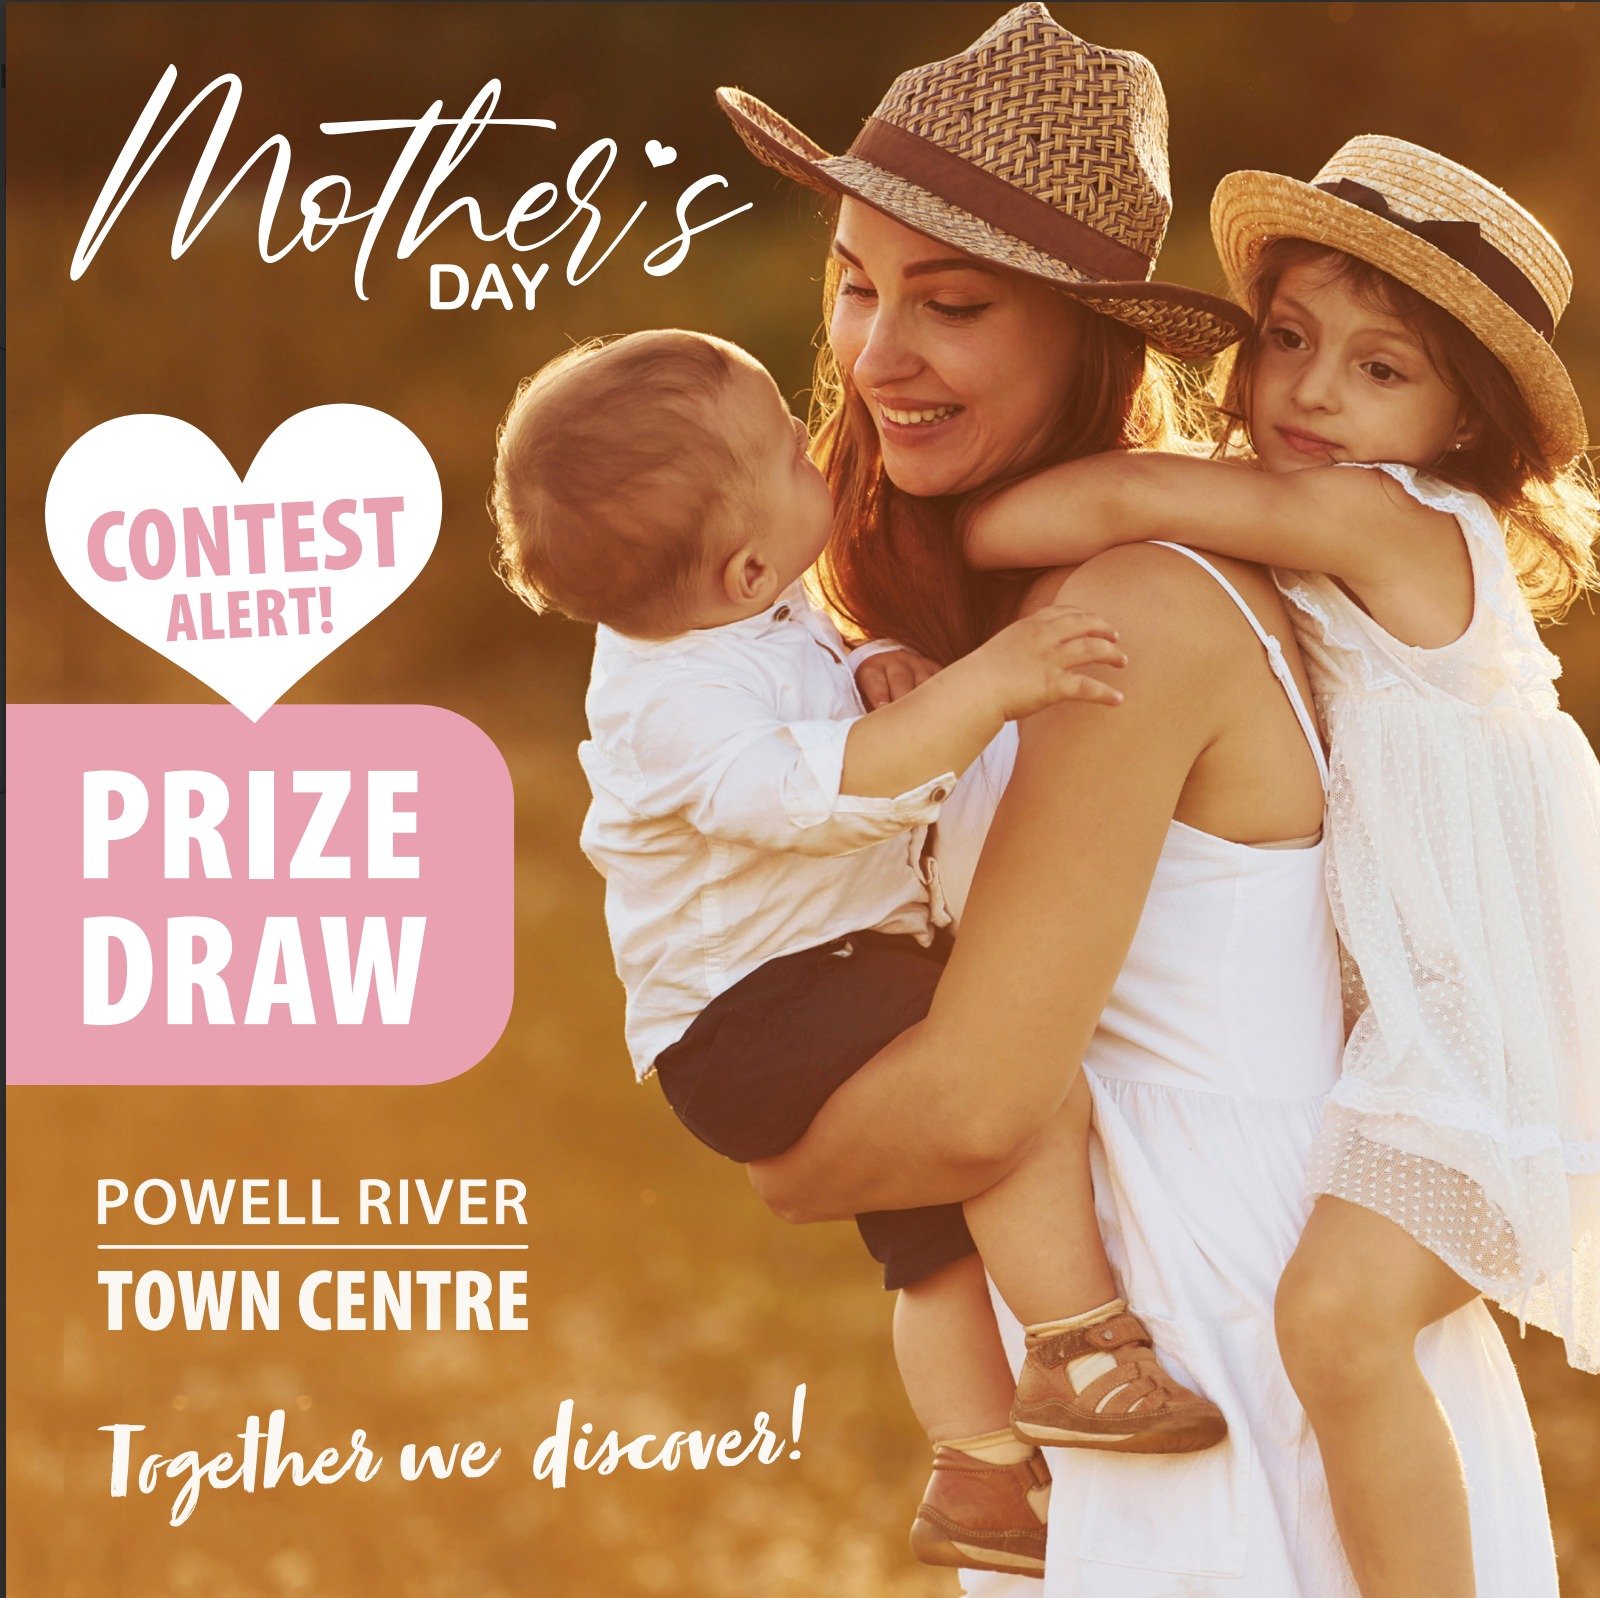 🌸 Celebrate Mom in Style! 🌸 Don't miss your chance to win the ultimate Mother's Day treat at Powell River Town Centre! Enter our Mother&rsquo;s Day Prize Draw for a chance to win a luxurious package worth $925, including a 2-night deluxe oceanfront